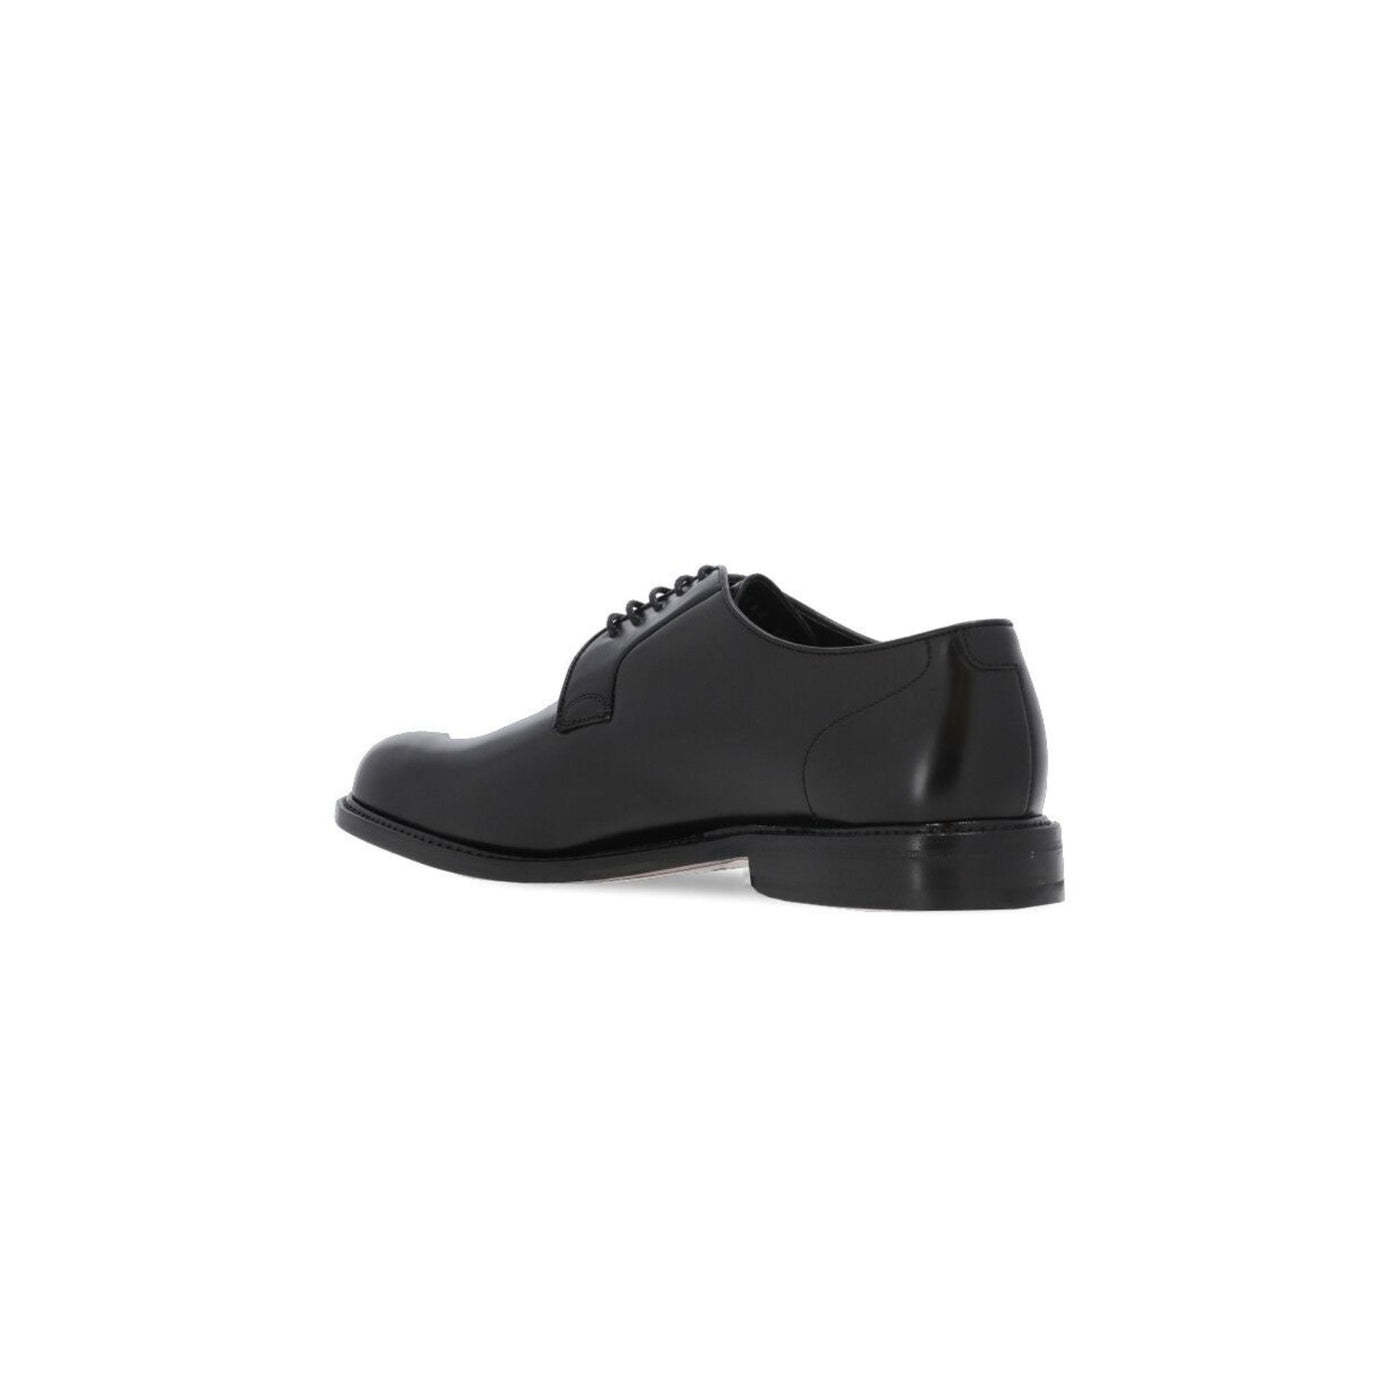 Men's shoes with round toe